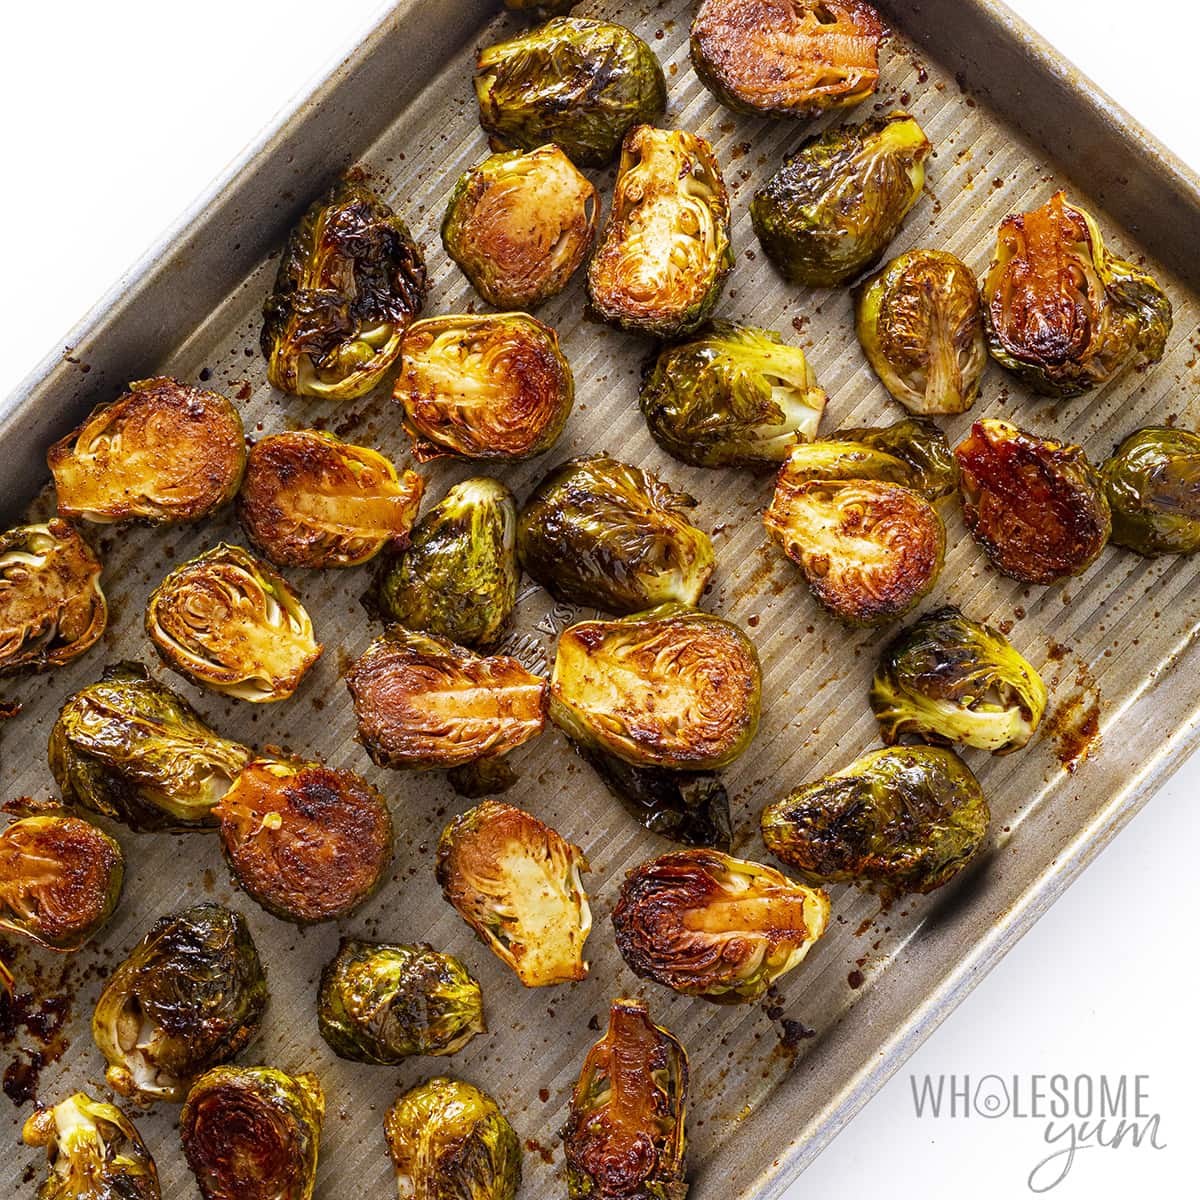 Roasted balsamic brussels sprouts on a baking sheet.